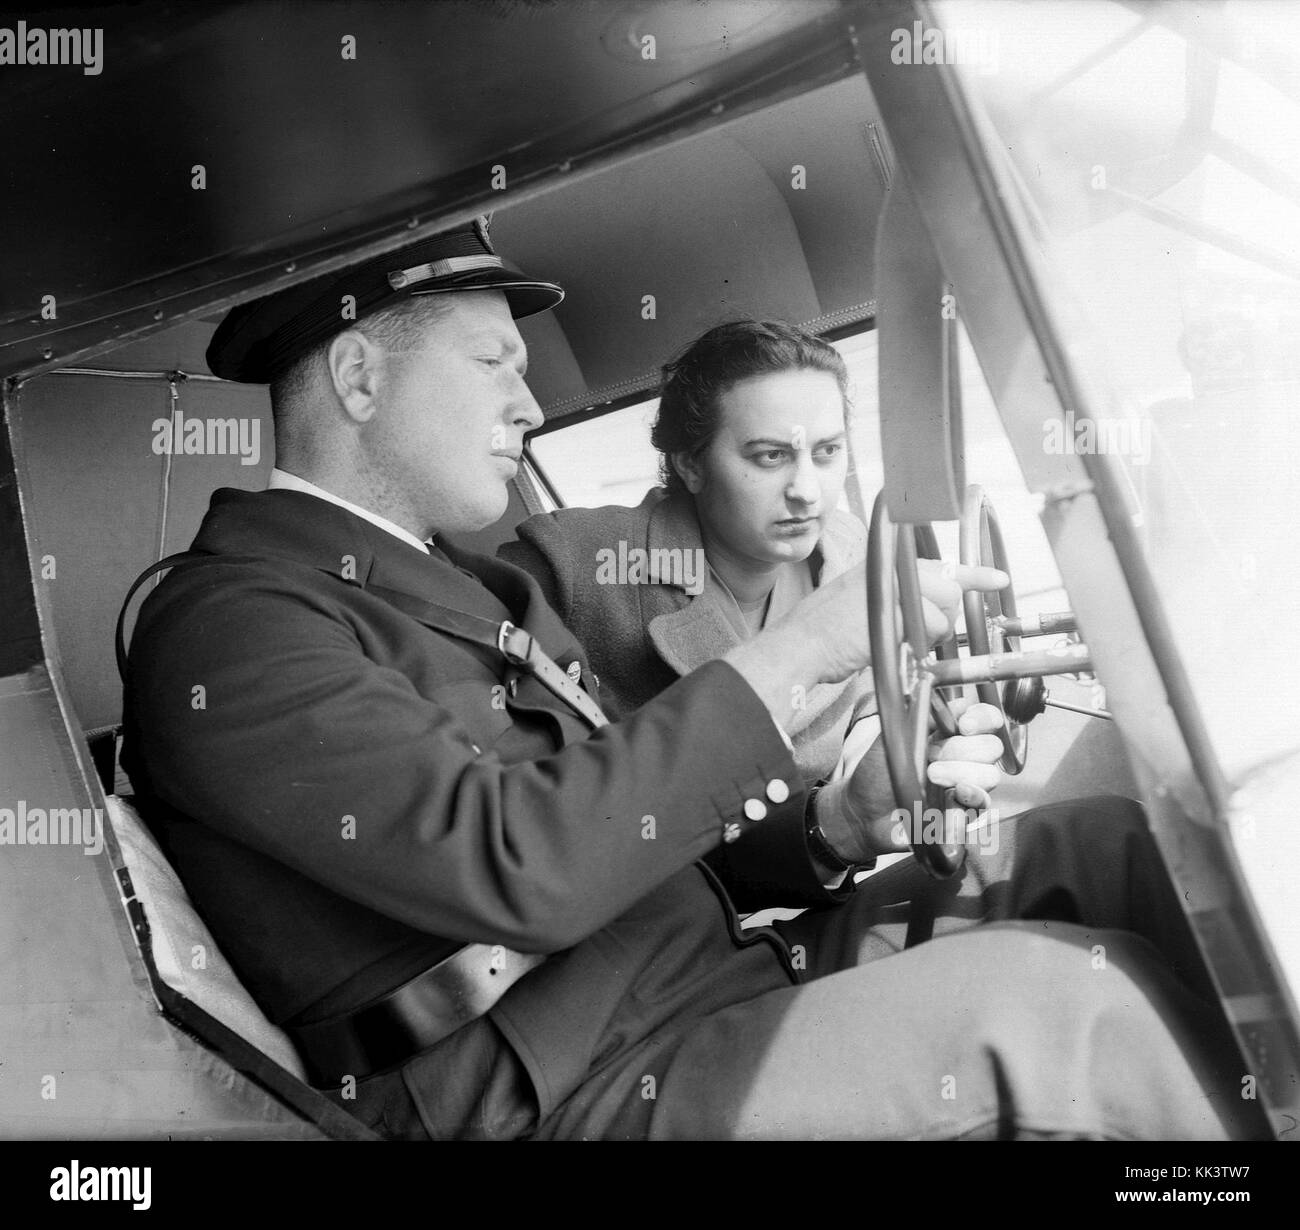 FLYING INSTRUCTOR FREDDY KATZ WITH A TRAINEE IN THE COCKPIT OF ONE OF THE TRAINING PLANES AT THE KATZ (PALESTINE FLYING SERVICE) FLYING SCHOOL IN LOD.D393 013 Stock Photo